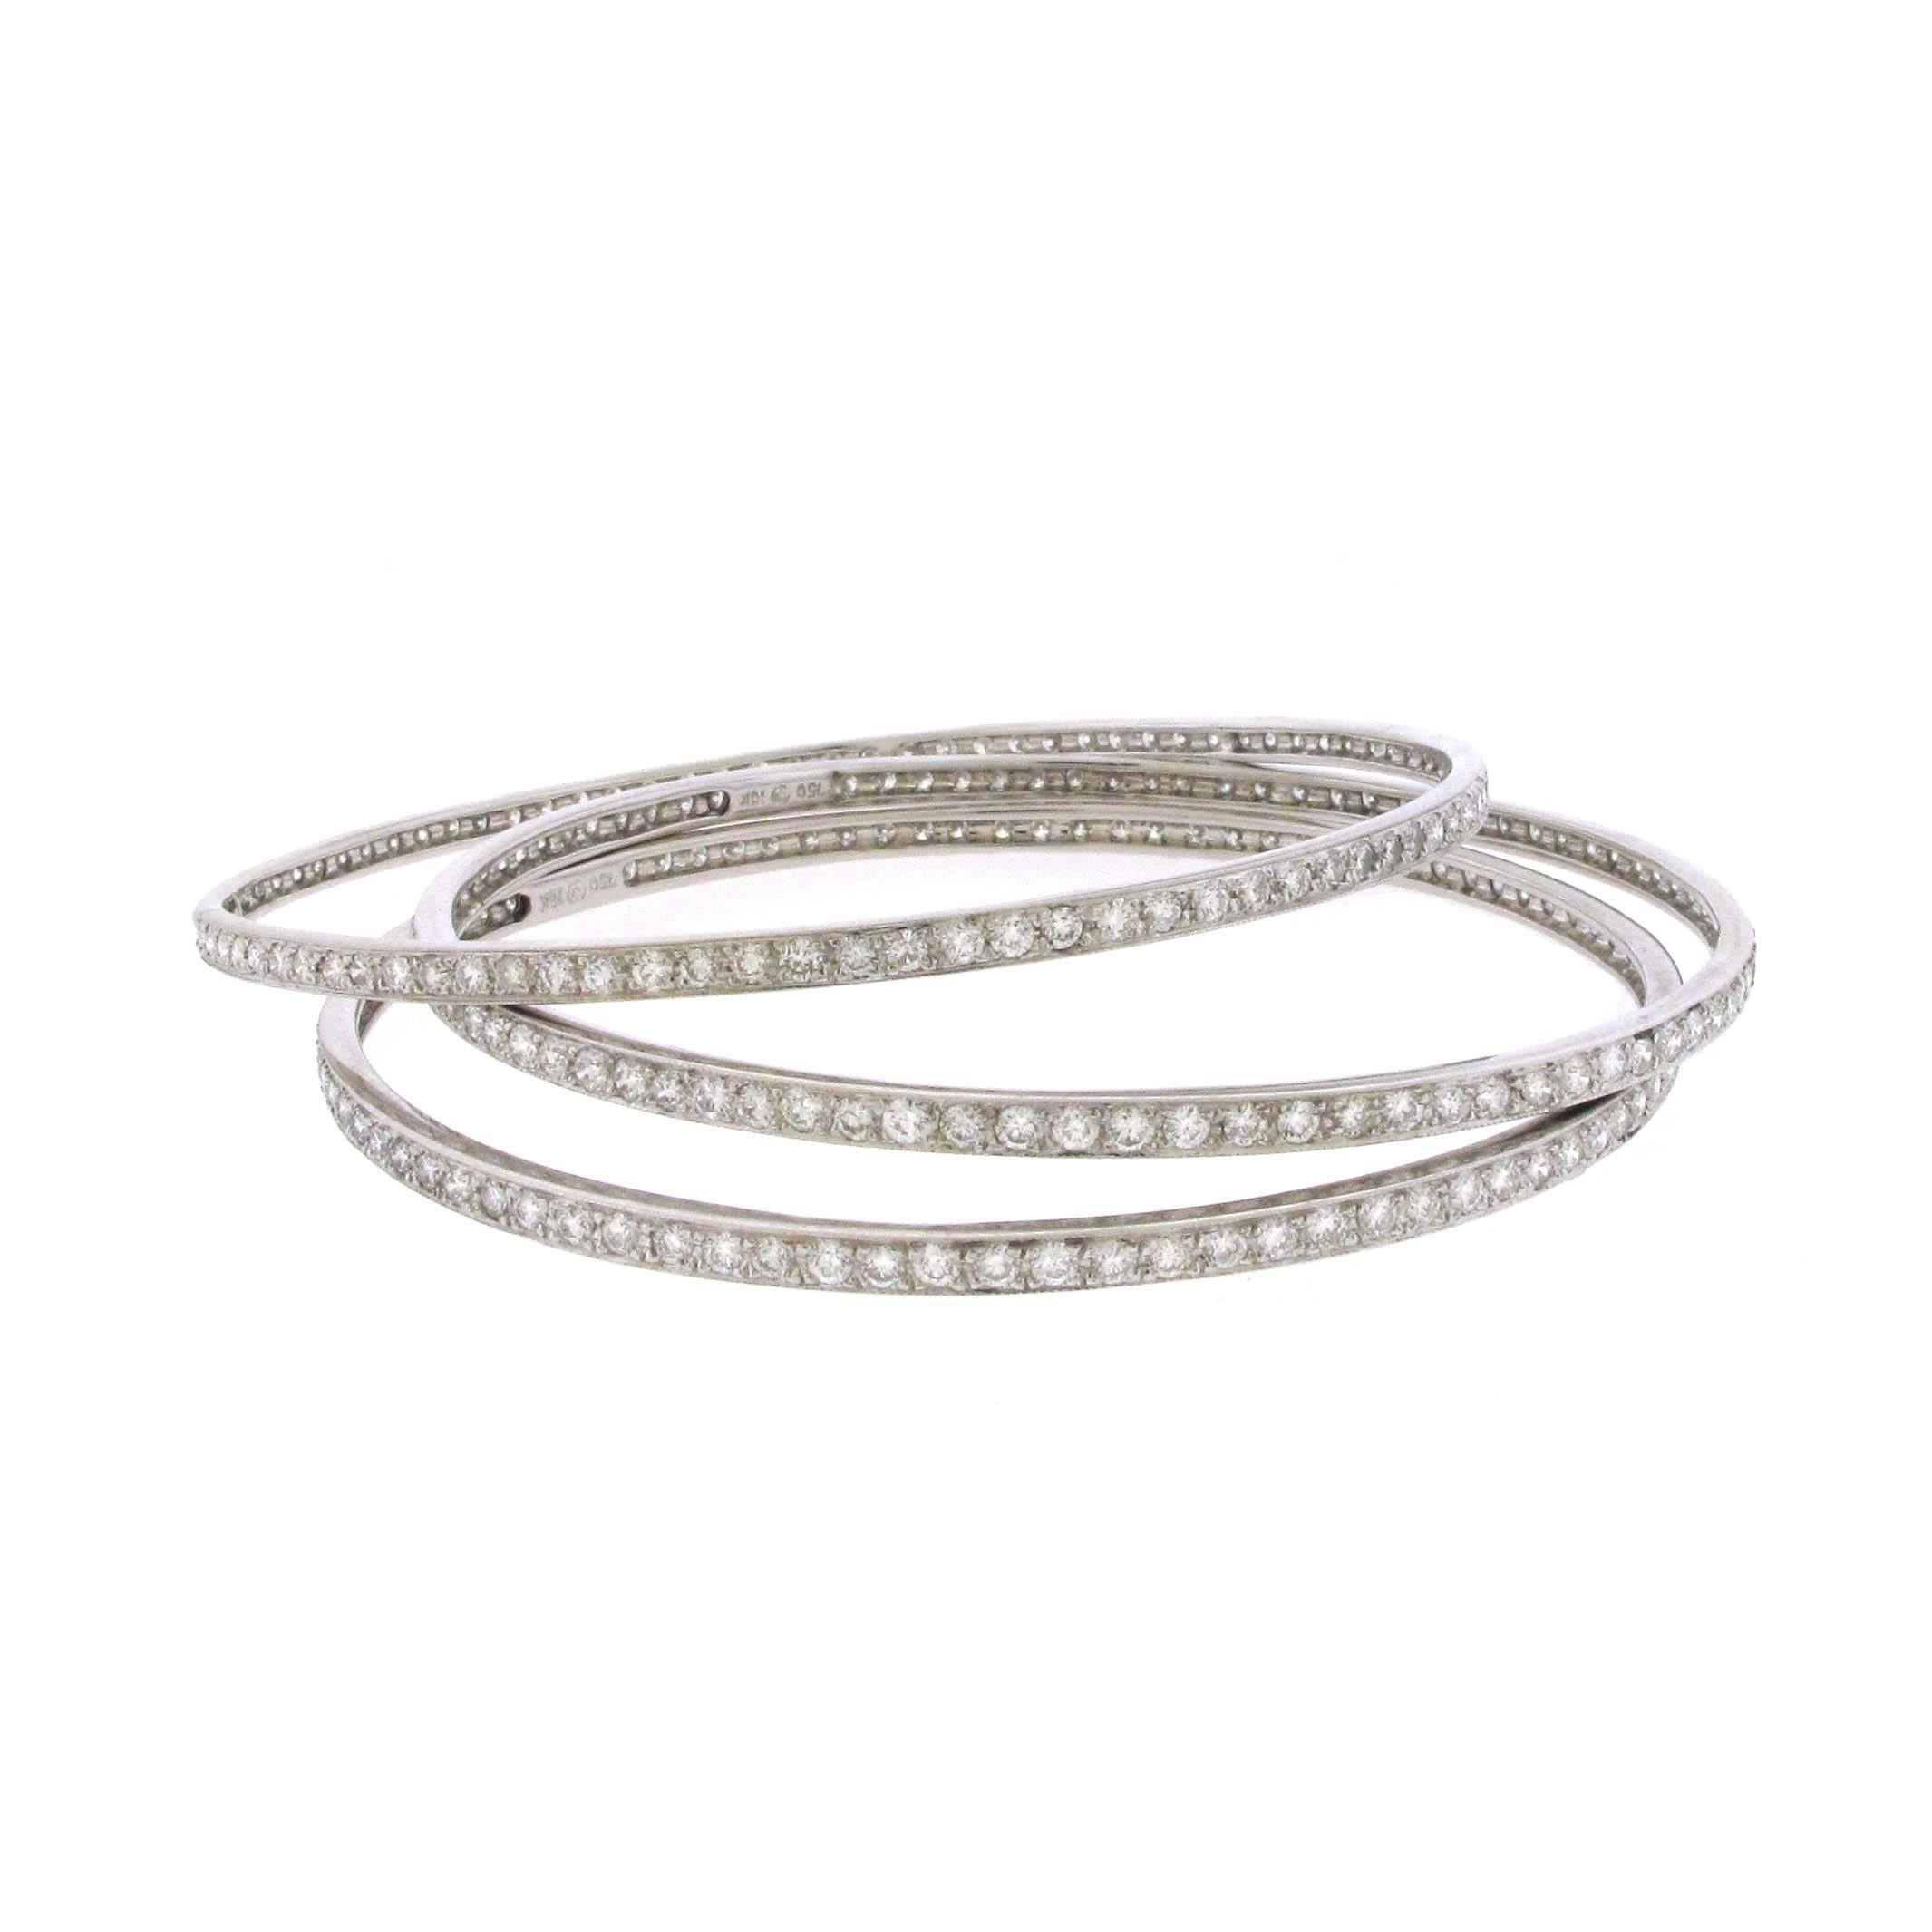 Three (3) channel set 18 karat white gold diamond bangle bracelets. There is are approximately 9.50 carats of diamonds. Each bracelet has over 3 carats of diamonds. They can be stacked together or worn individually. The color of the diamonds are H-I